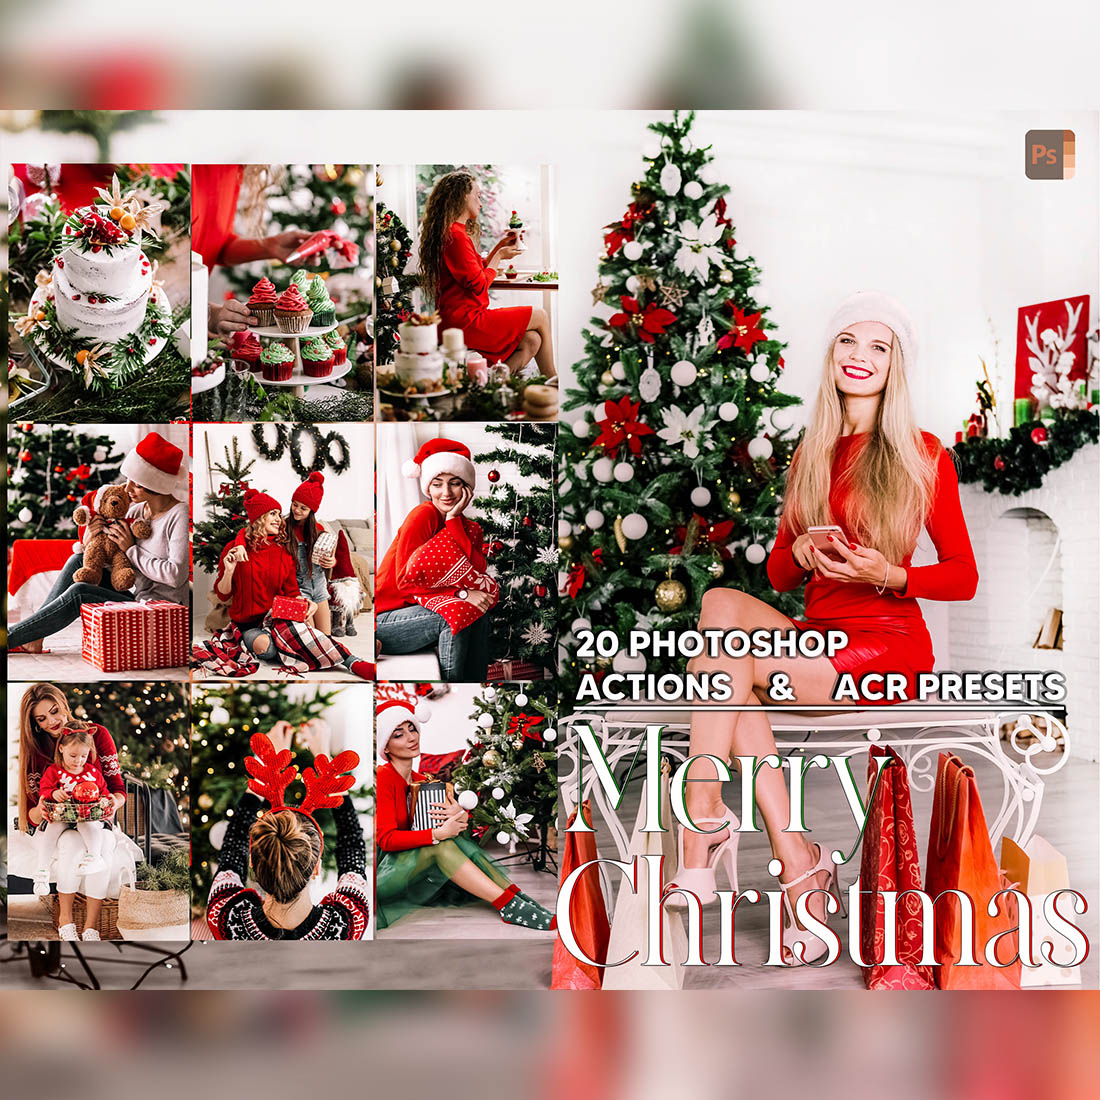 20 Photoshop Actions, Merry Christmas Ps Action, Light ACR Preset, Xmas Ps Filter, Atn Pictures And Style Theme For Instagram, Blogger cover image.